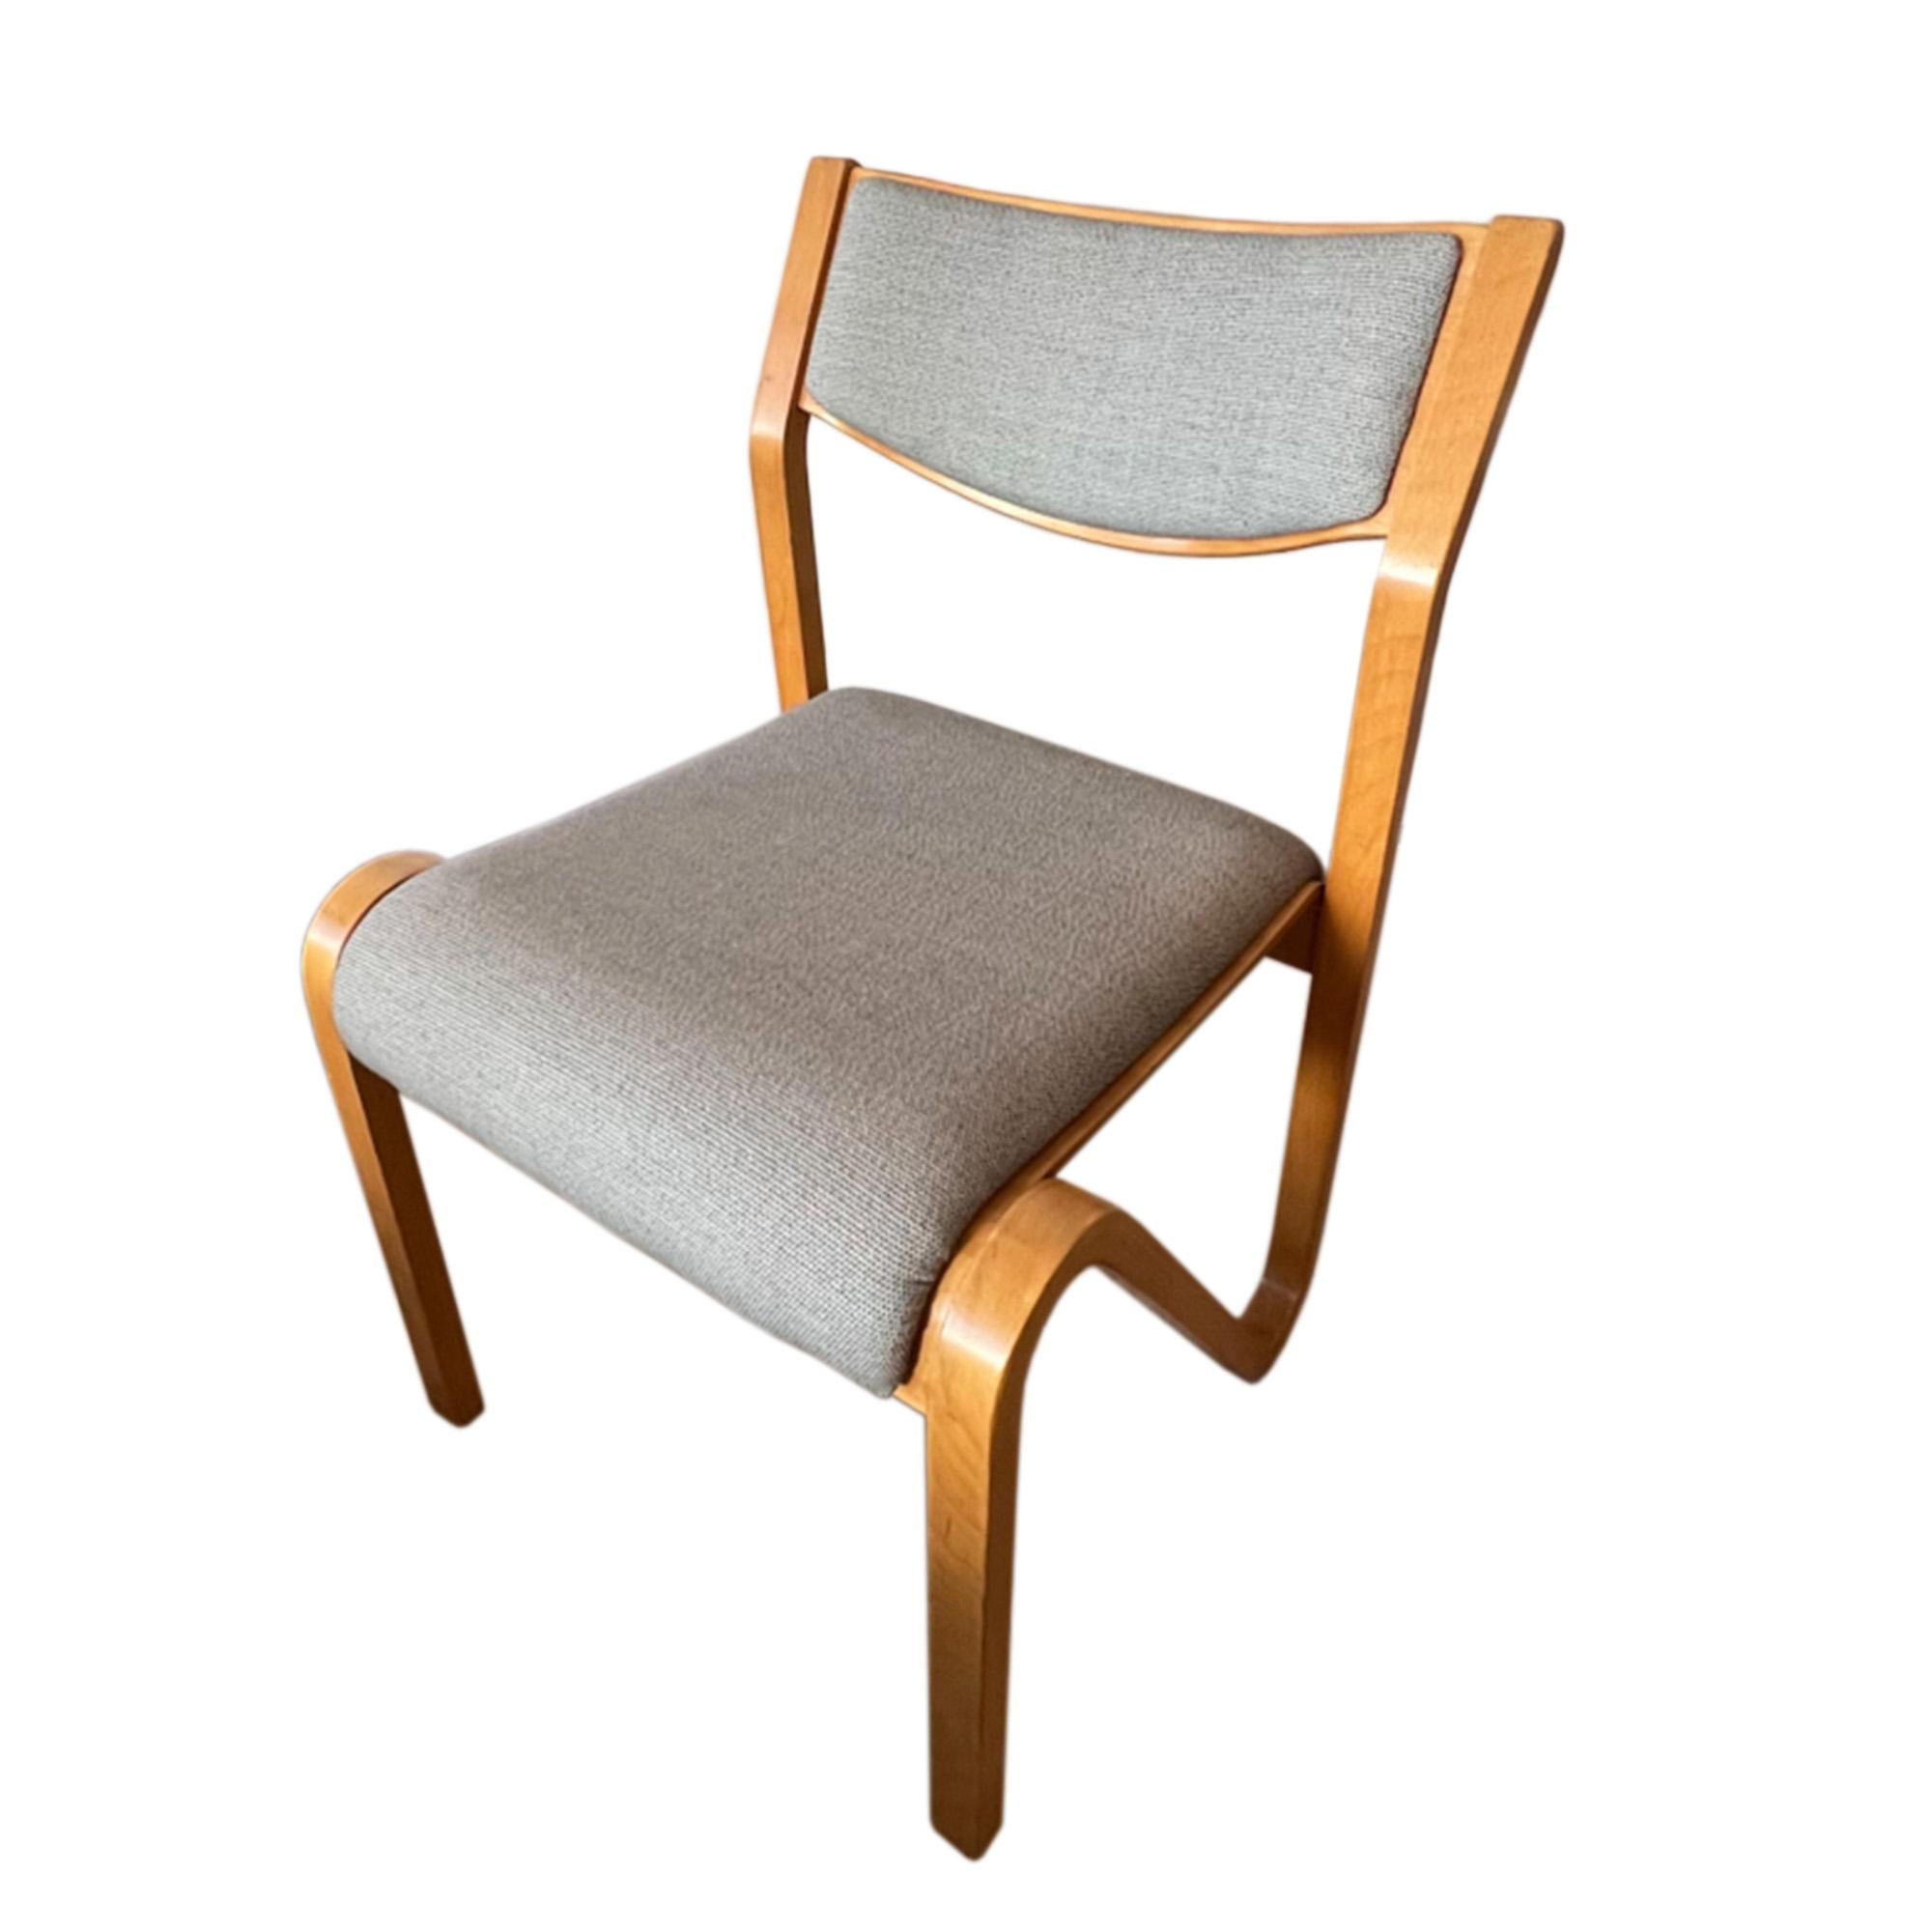 A set of stylish French chairs, made in the 1960s in the manner of Alvar Alto. Attractive and practical mid century design. 

We've had them reupholstered using Bute fabric. 

Bute Fabrics have a wonderful story. The mill was founded in 1947 by